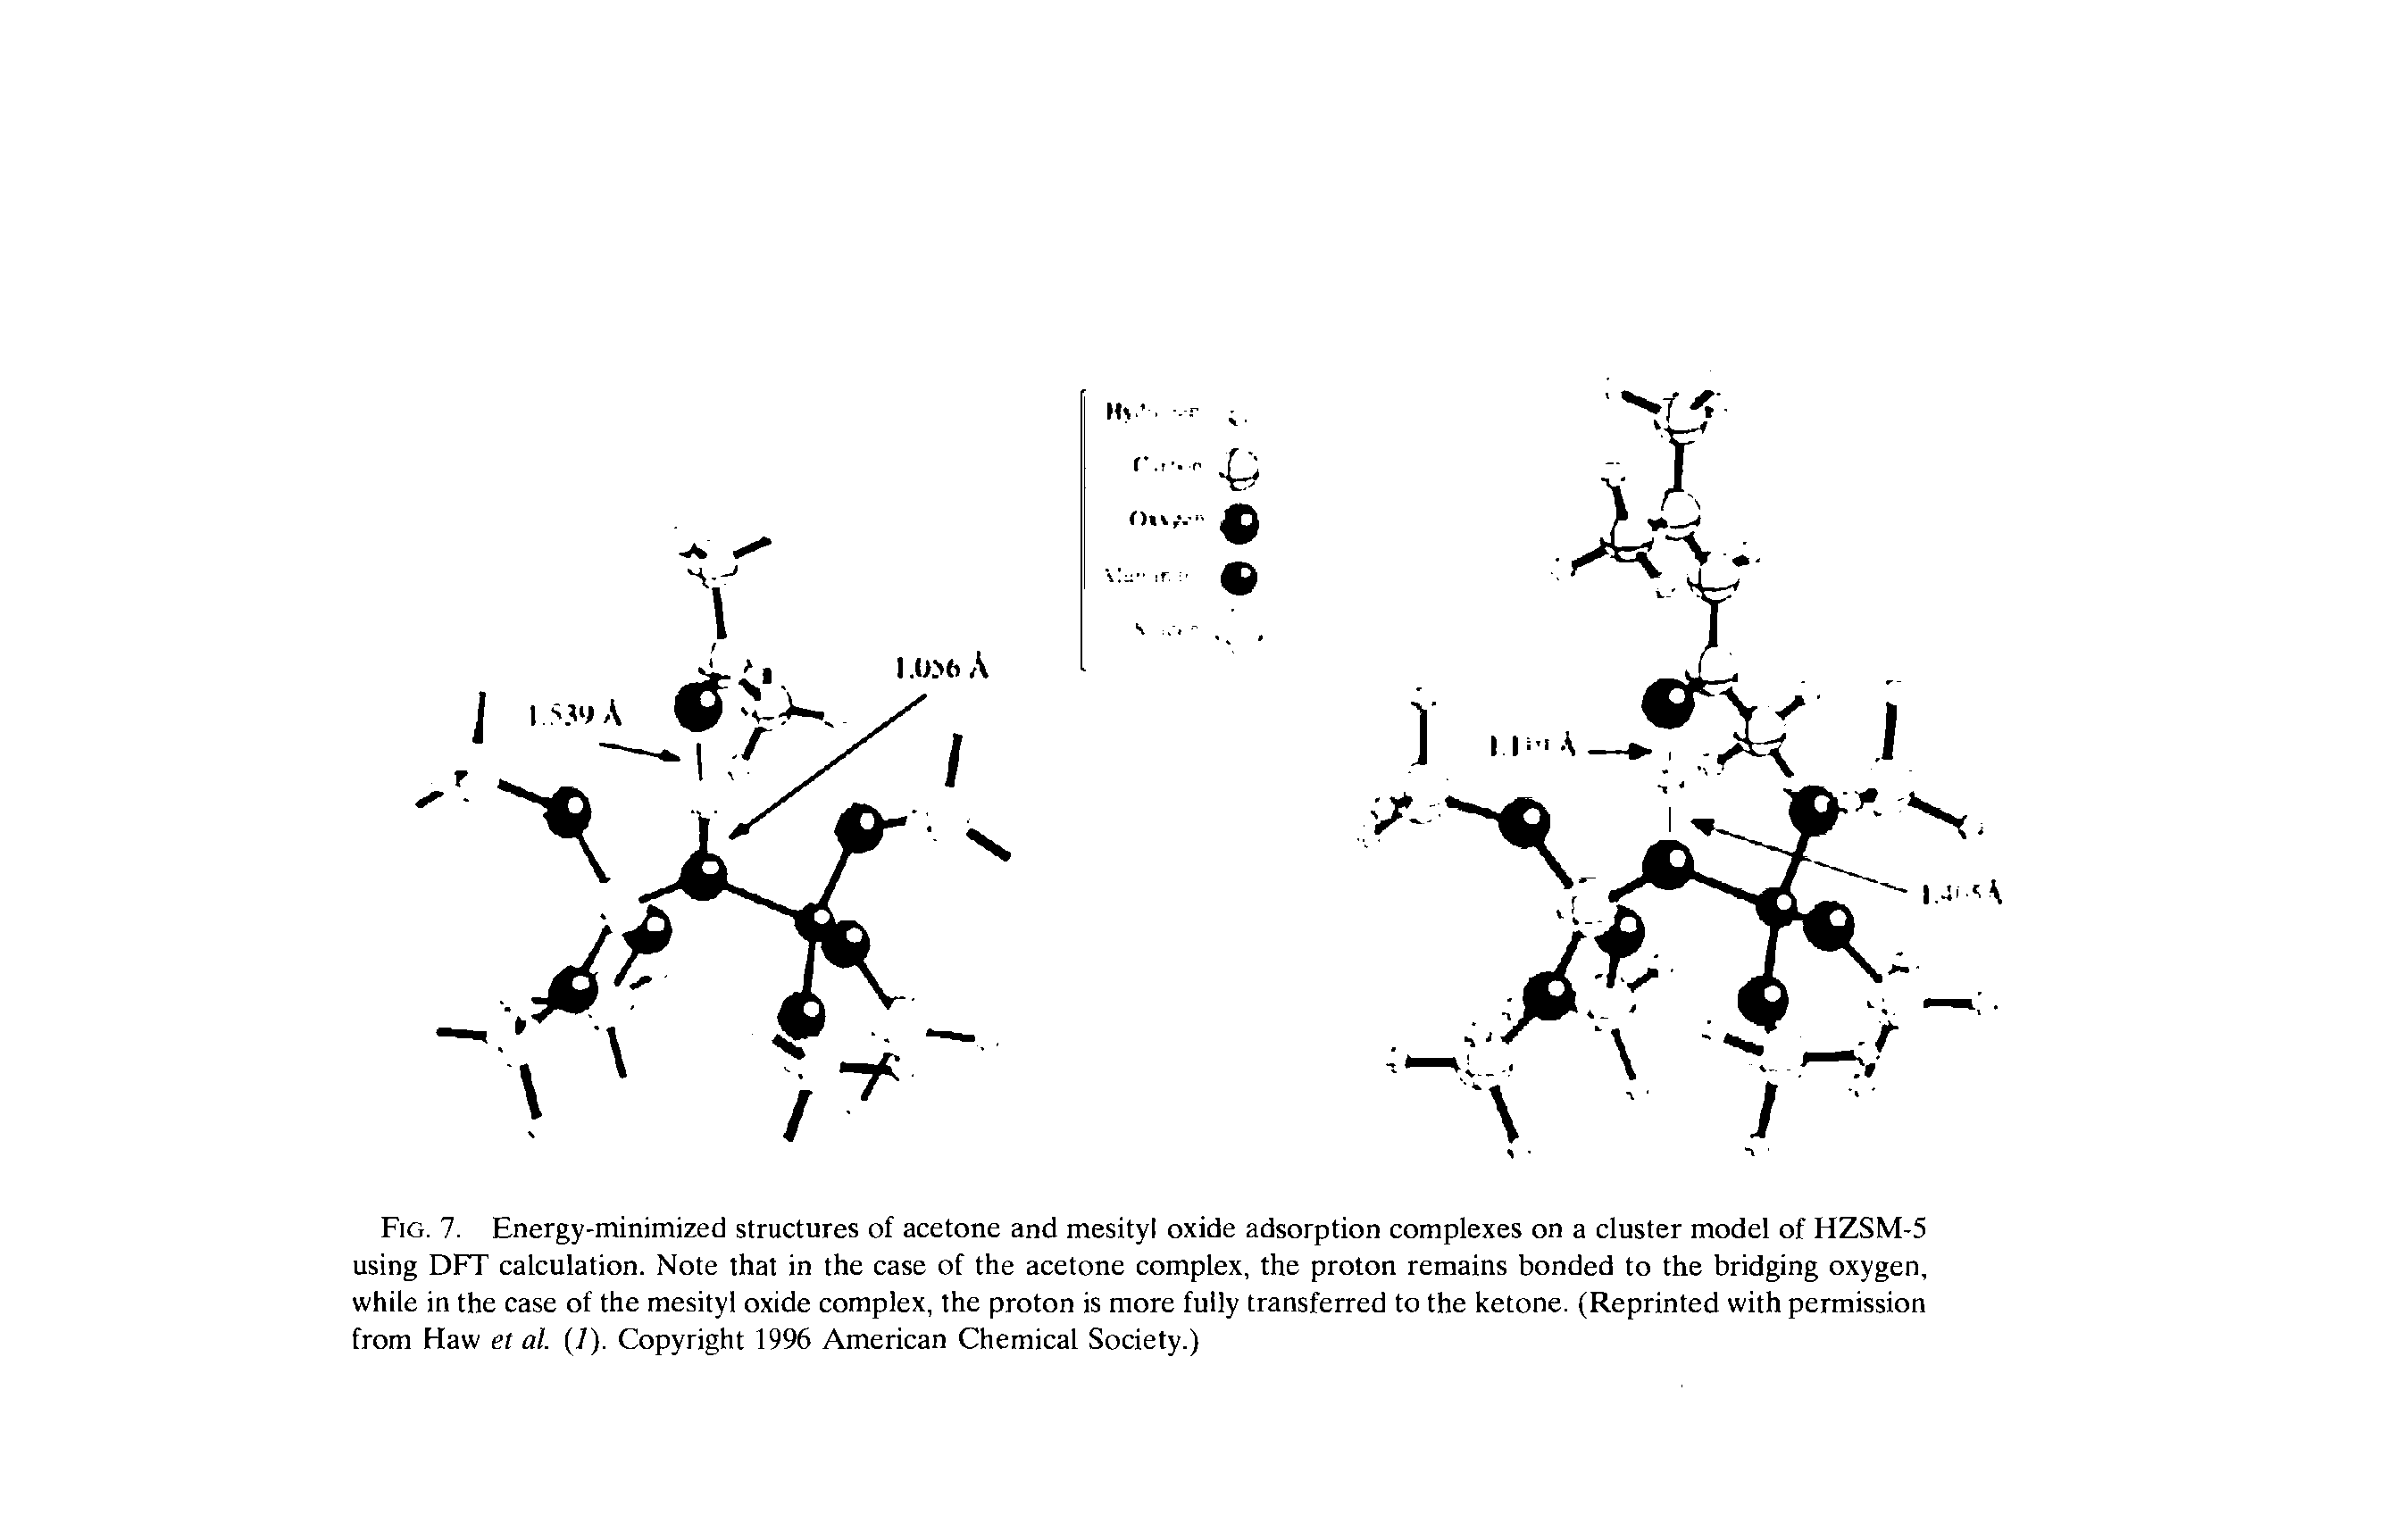 Fig. 7. Energy-minimized structures of acetone and mesityl oxide adsorption complexes on a cluster model of HZSM-5 using DFT calculation. Note that in the case of the acetone complex, the proton remains bonded to the bridging oxygen, while in the case of the mesityl oxide complex, the proton is more fully transferred to the ketone. (Reprinted with permission from Haw et al. (7). Copyright 1996 American Chemical Society.)...